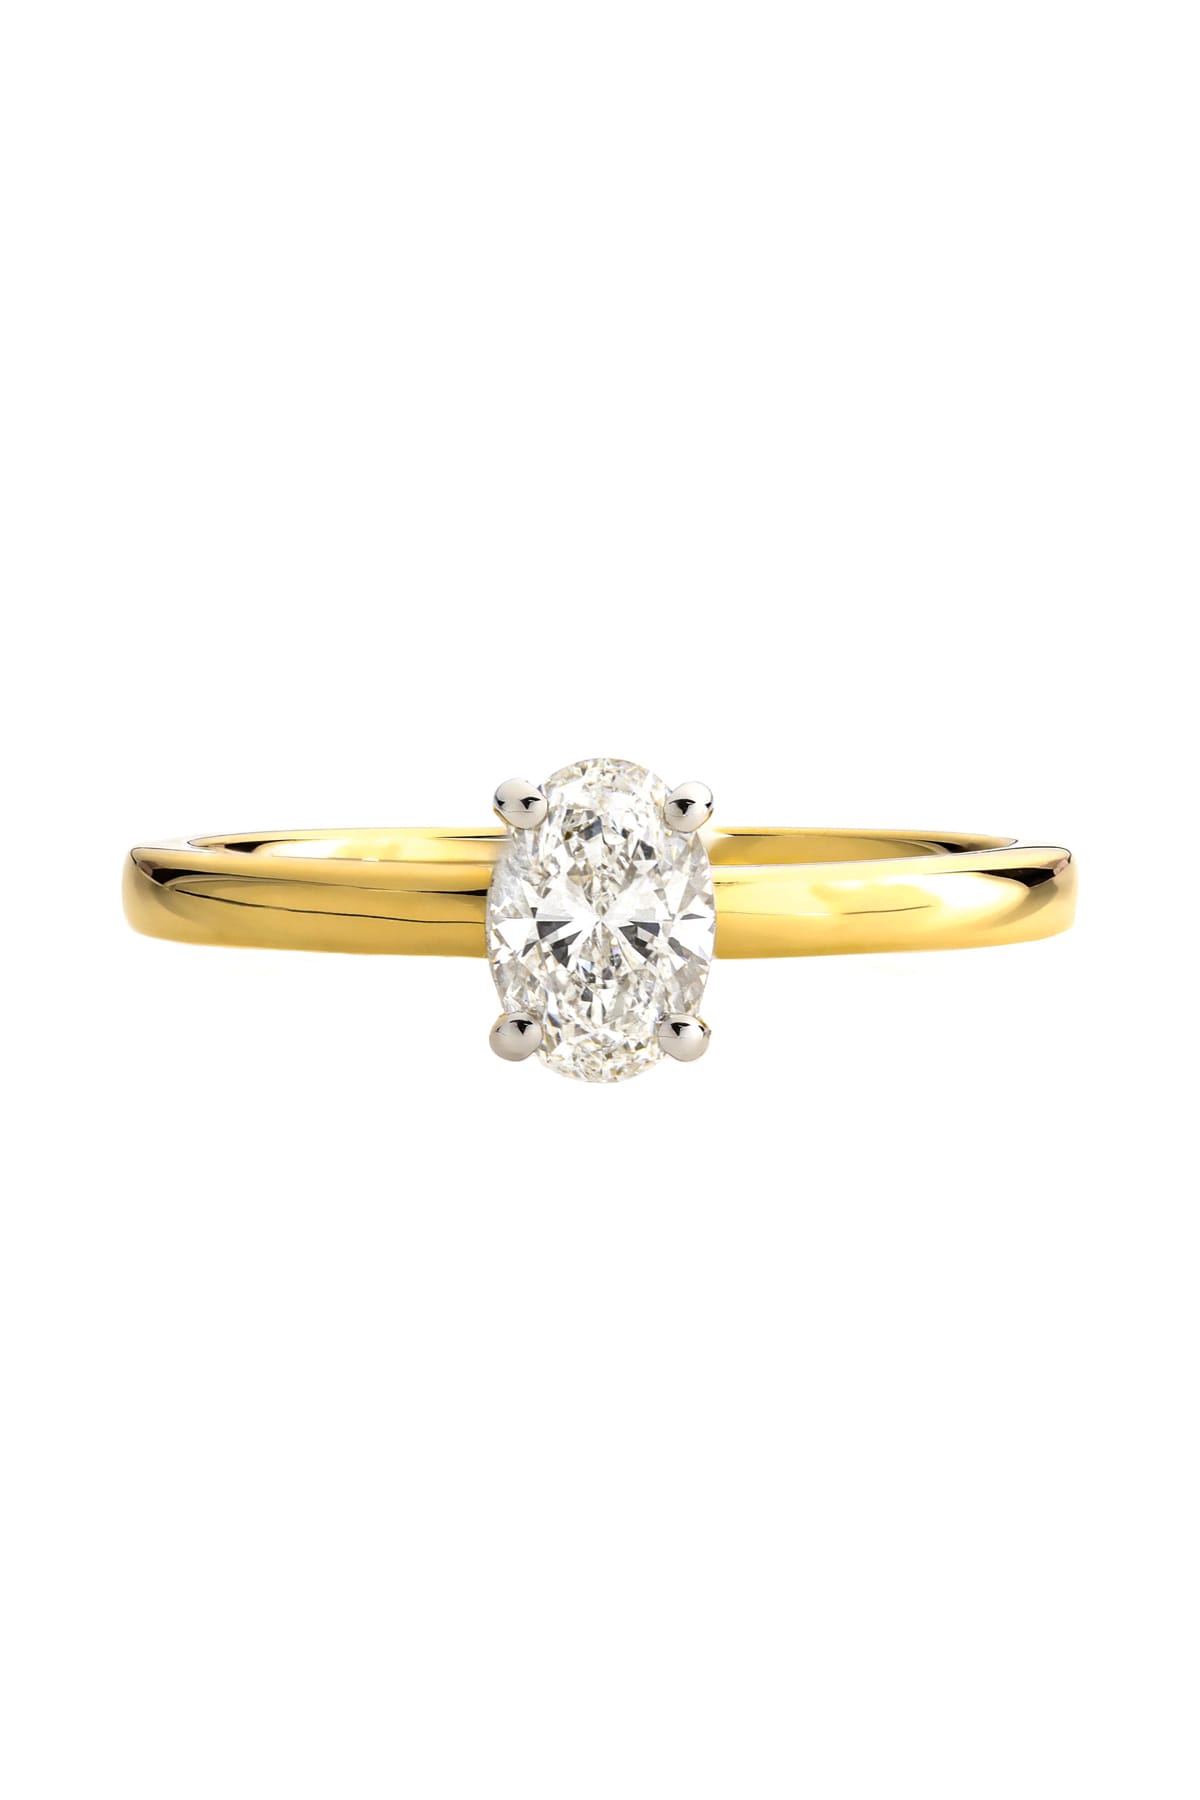 18 Carat Gold 0.71ct Oval Diamond Engagement Ring in yellow gold available at LeGassick Diamonds and Jewellery Gold Coast, Australia.